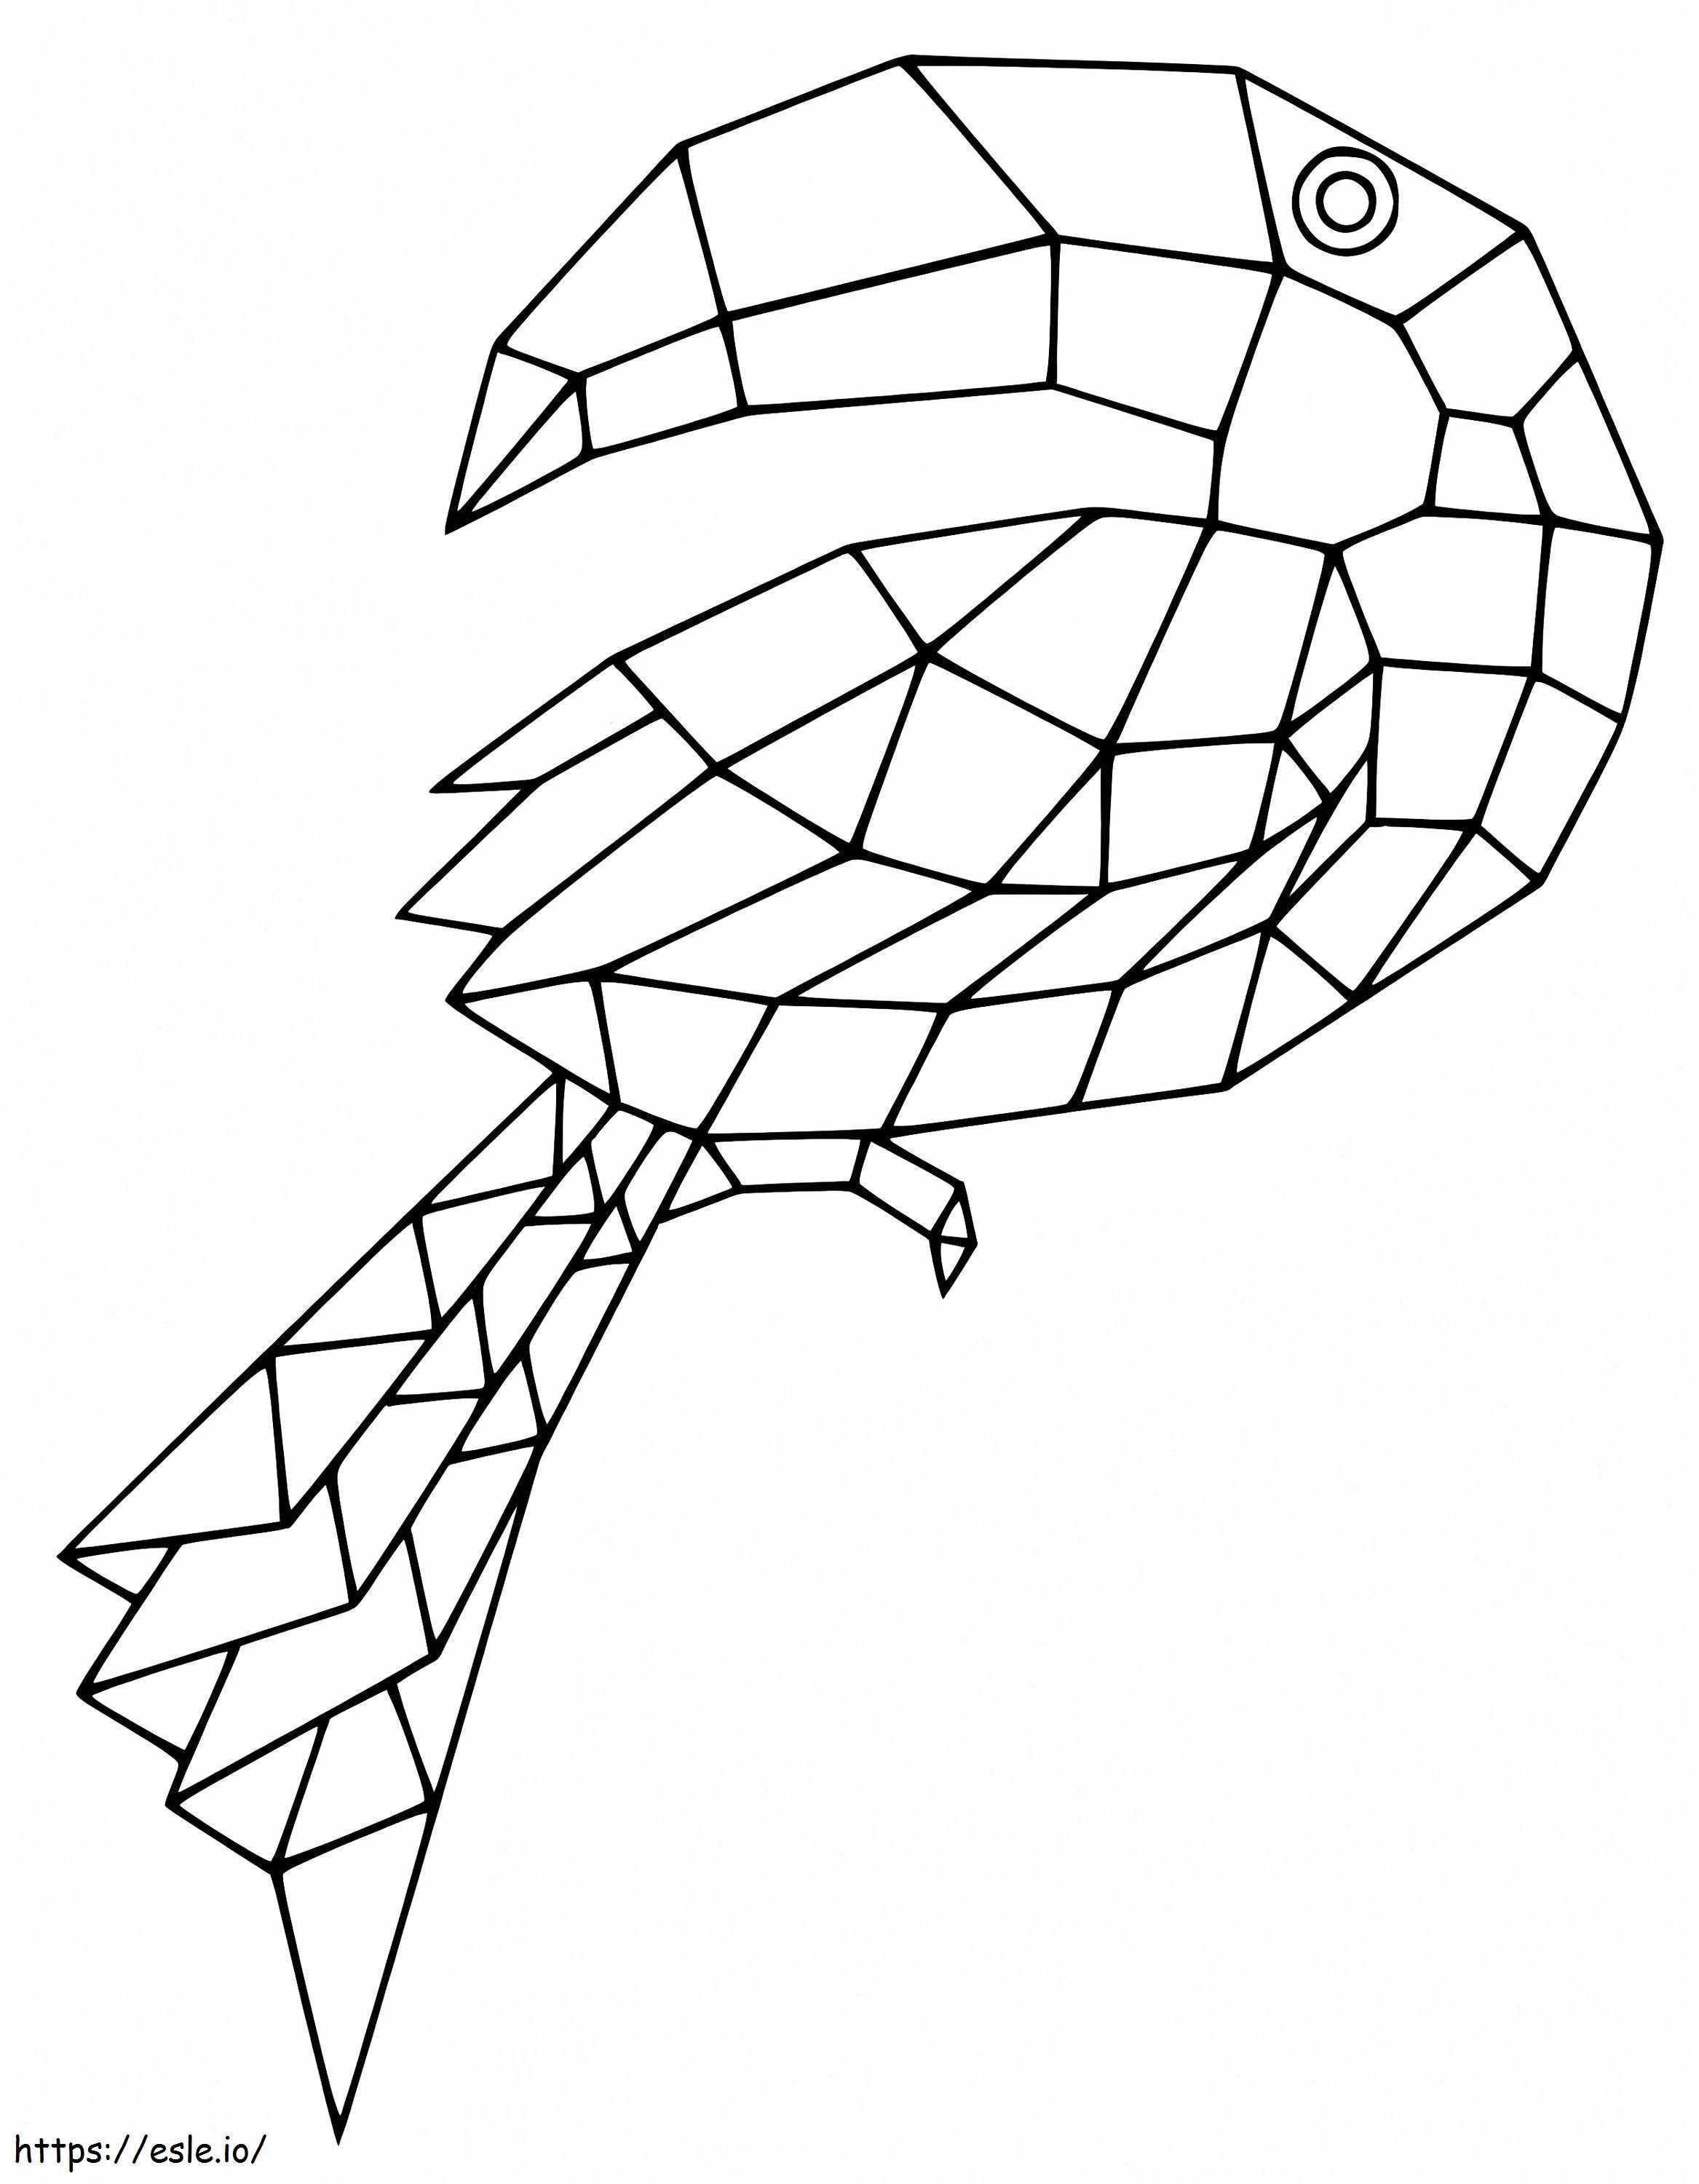 Origami Hornbill 1 coloring page